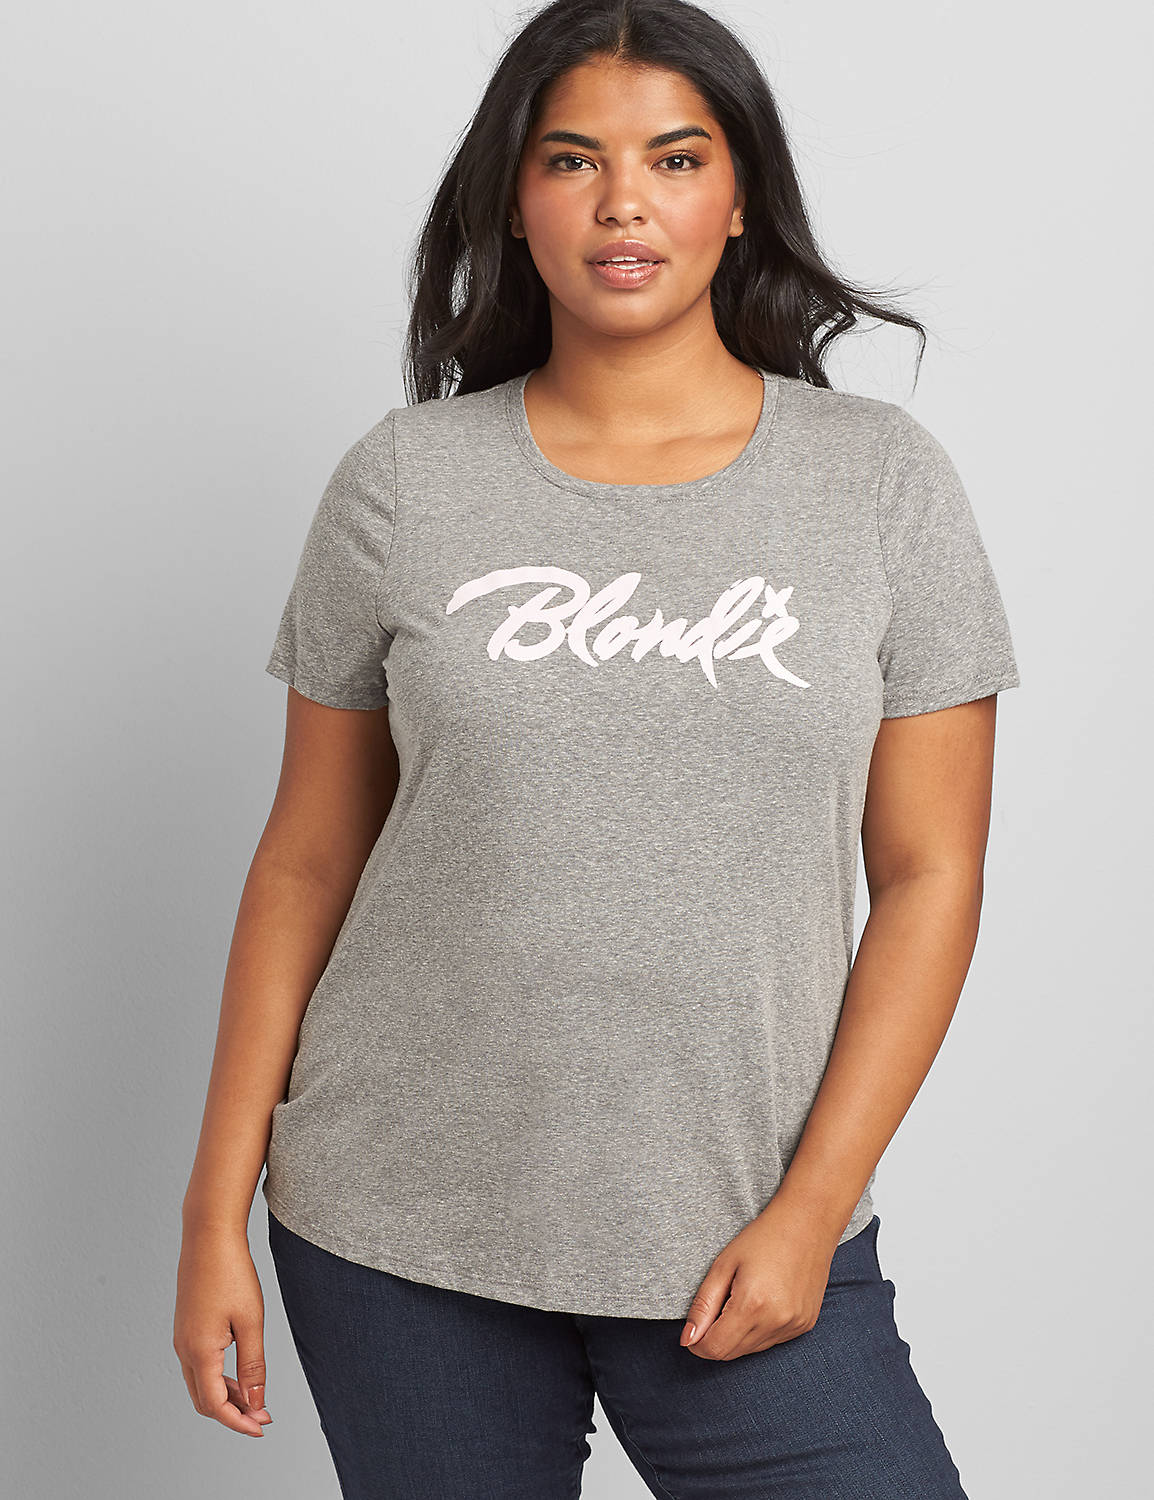 Short Sleeve Crew Neck Tee Graphic: Blondie 1118221:Charcoal Grey Heather:26/28 Product Image 1